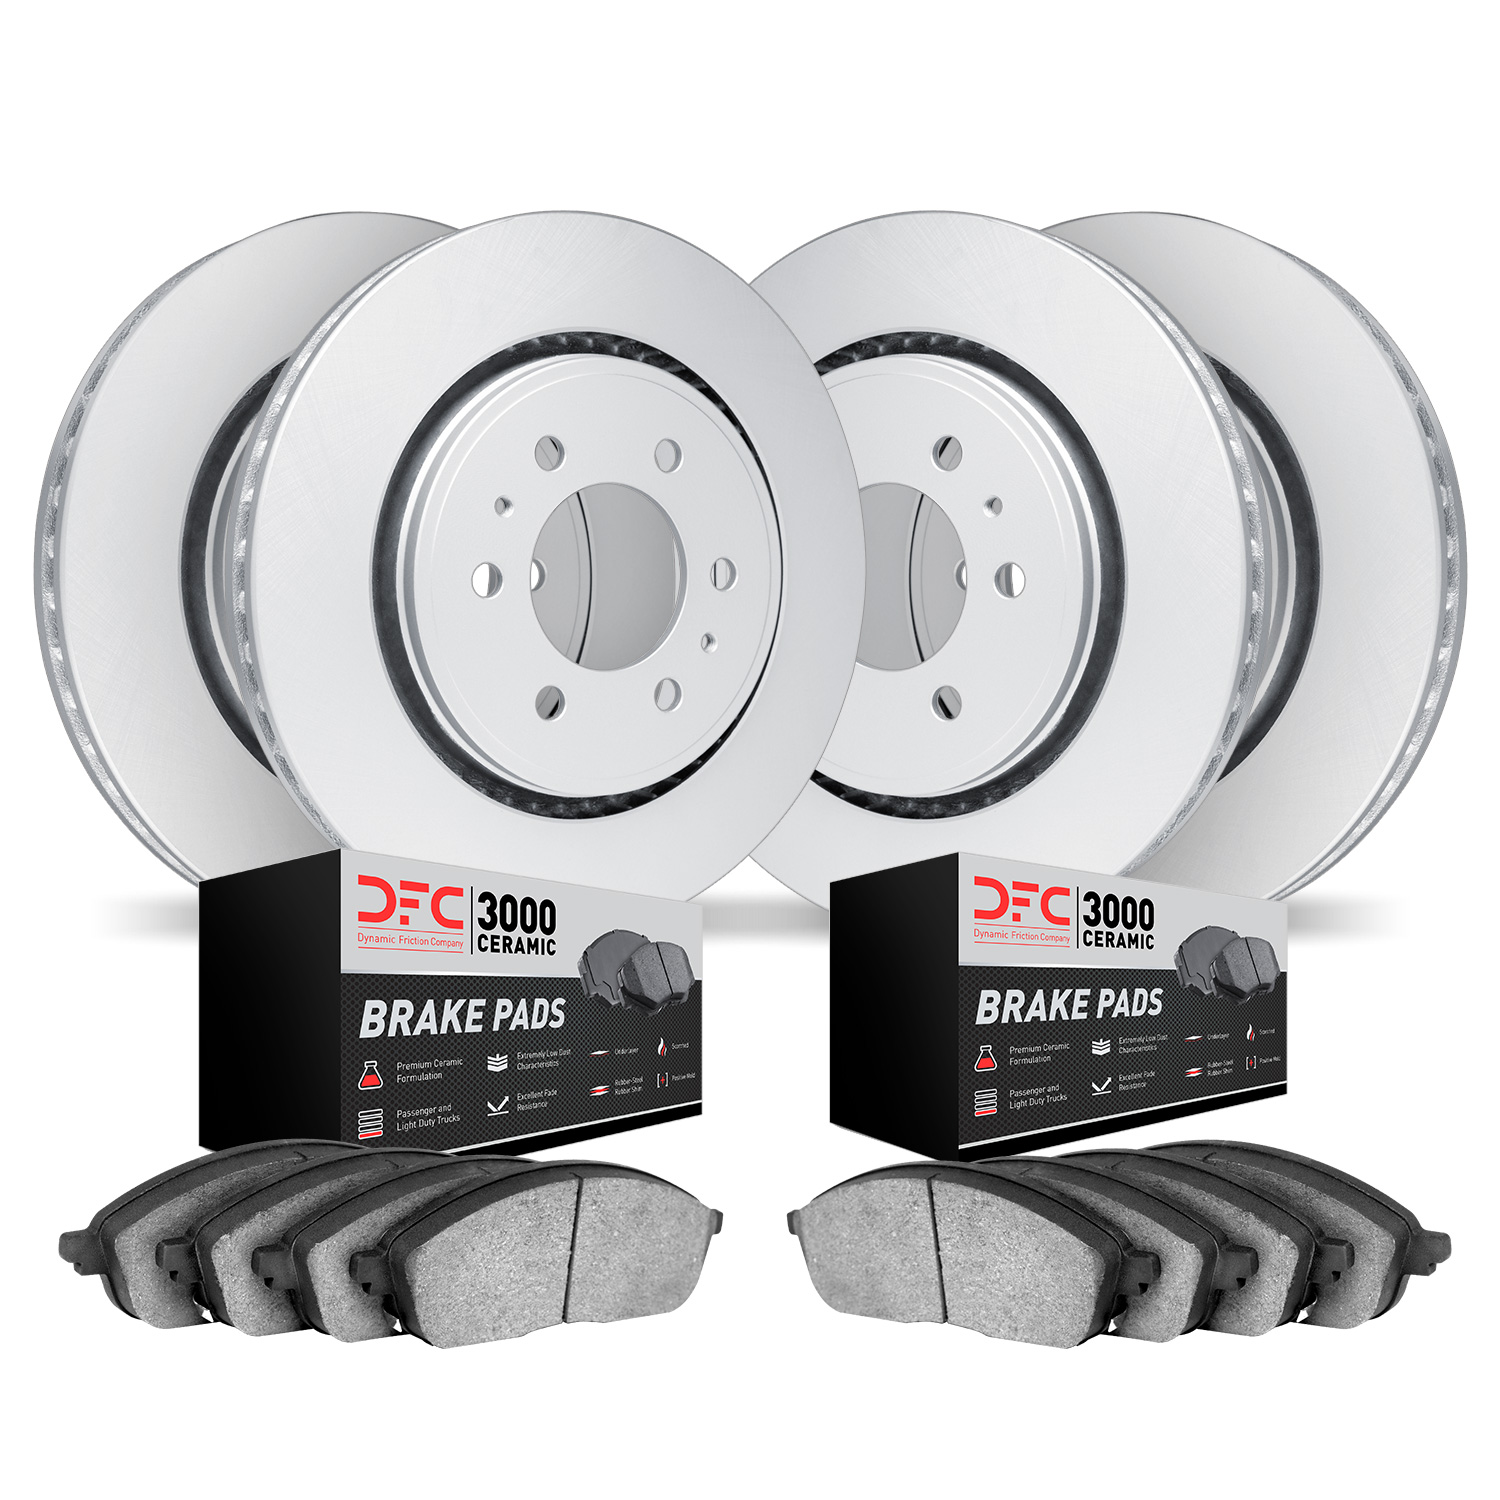 4304-67027 Geospec Brake Rotors with 3000-Series Ceramic Brake Pads Kit, Fits Select Multiple Makes/Models, Position: Front and